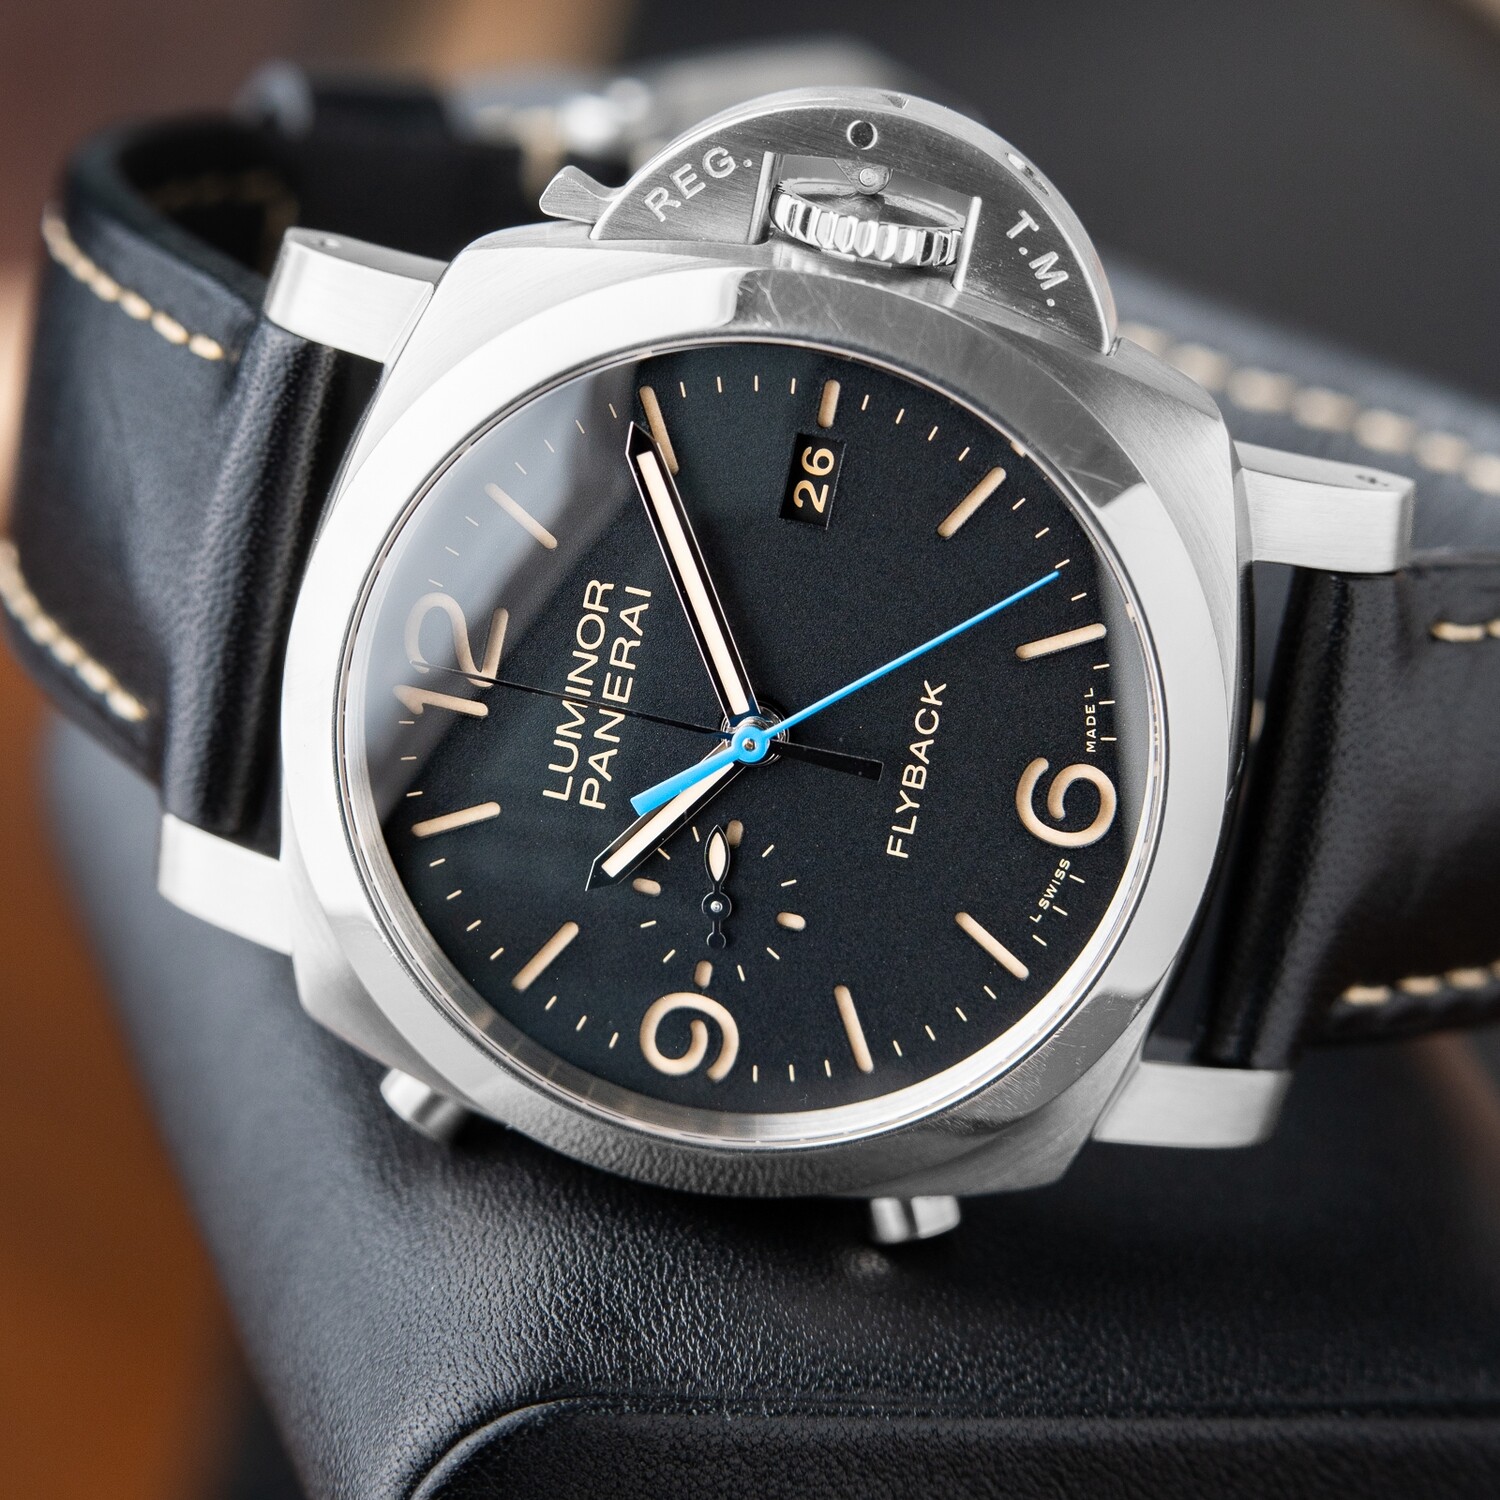 Panerai Luminor 1950 3 Days Flyback Chronograph Black Dial Steel Leather PAM524